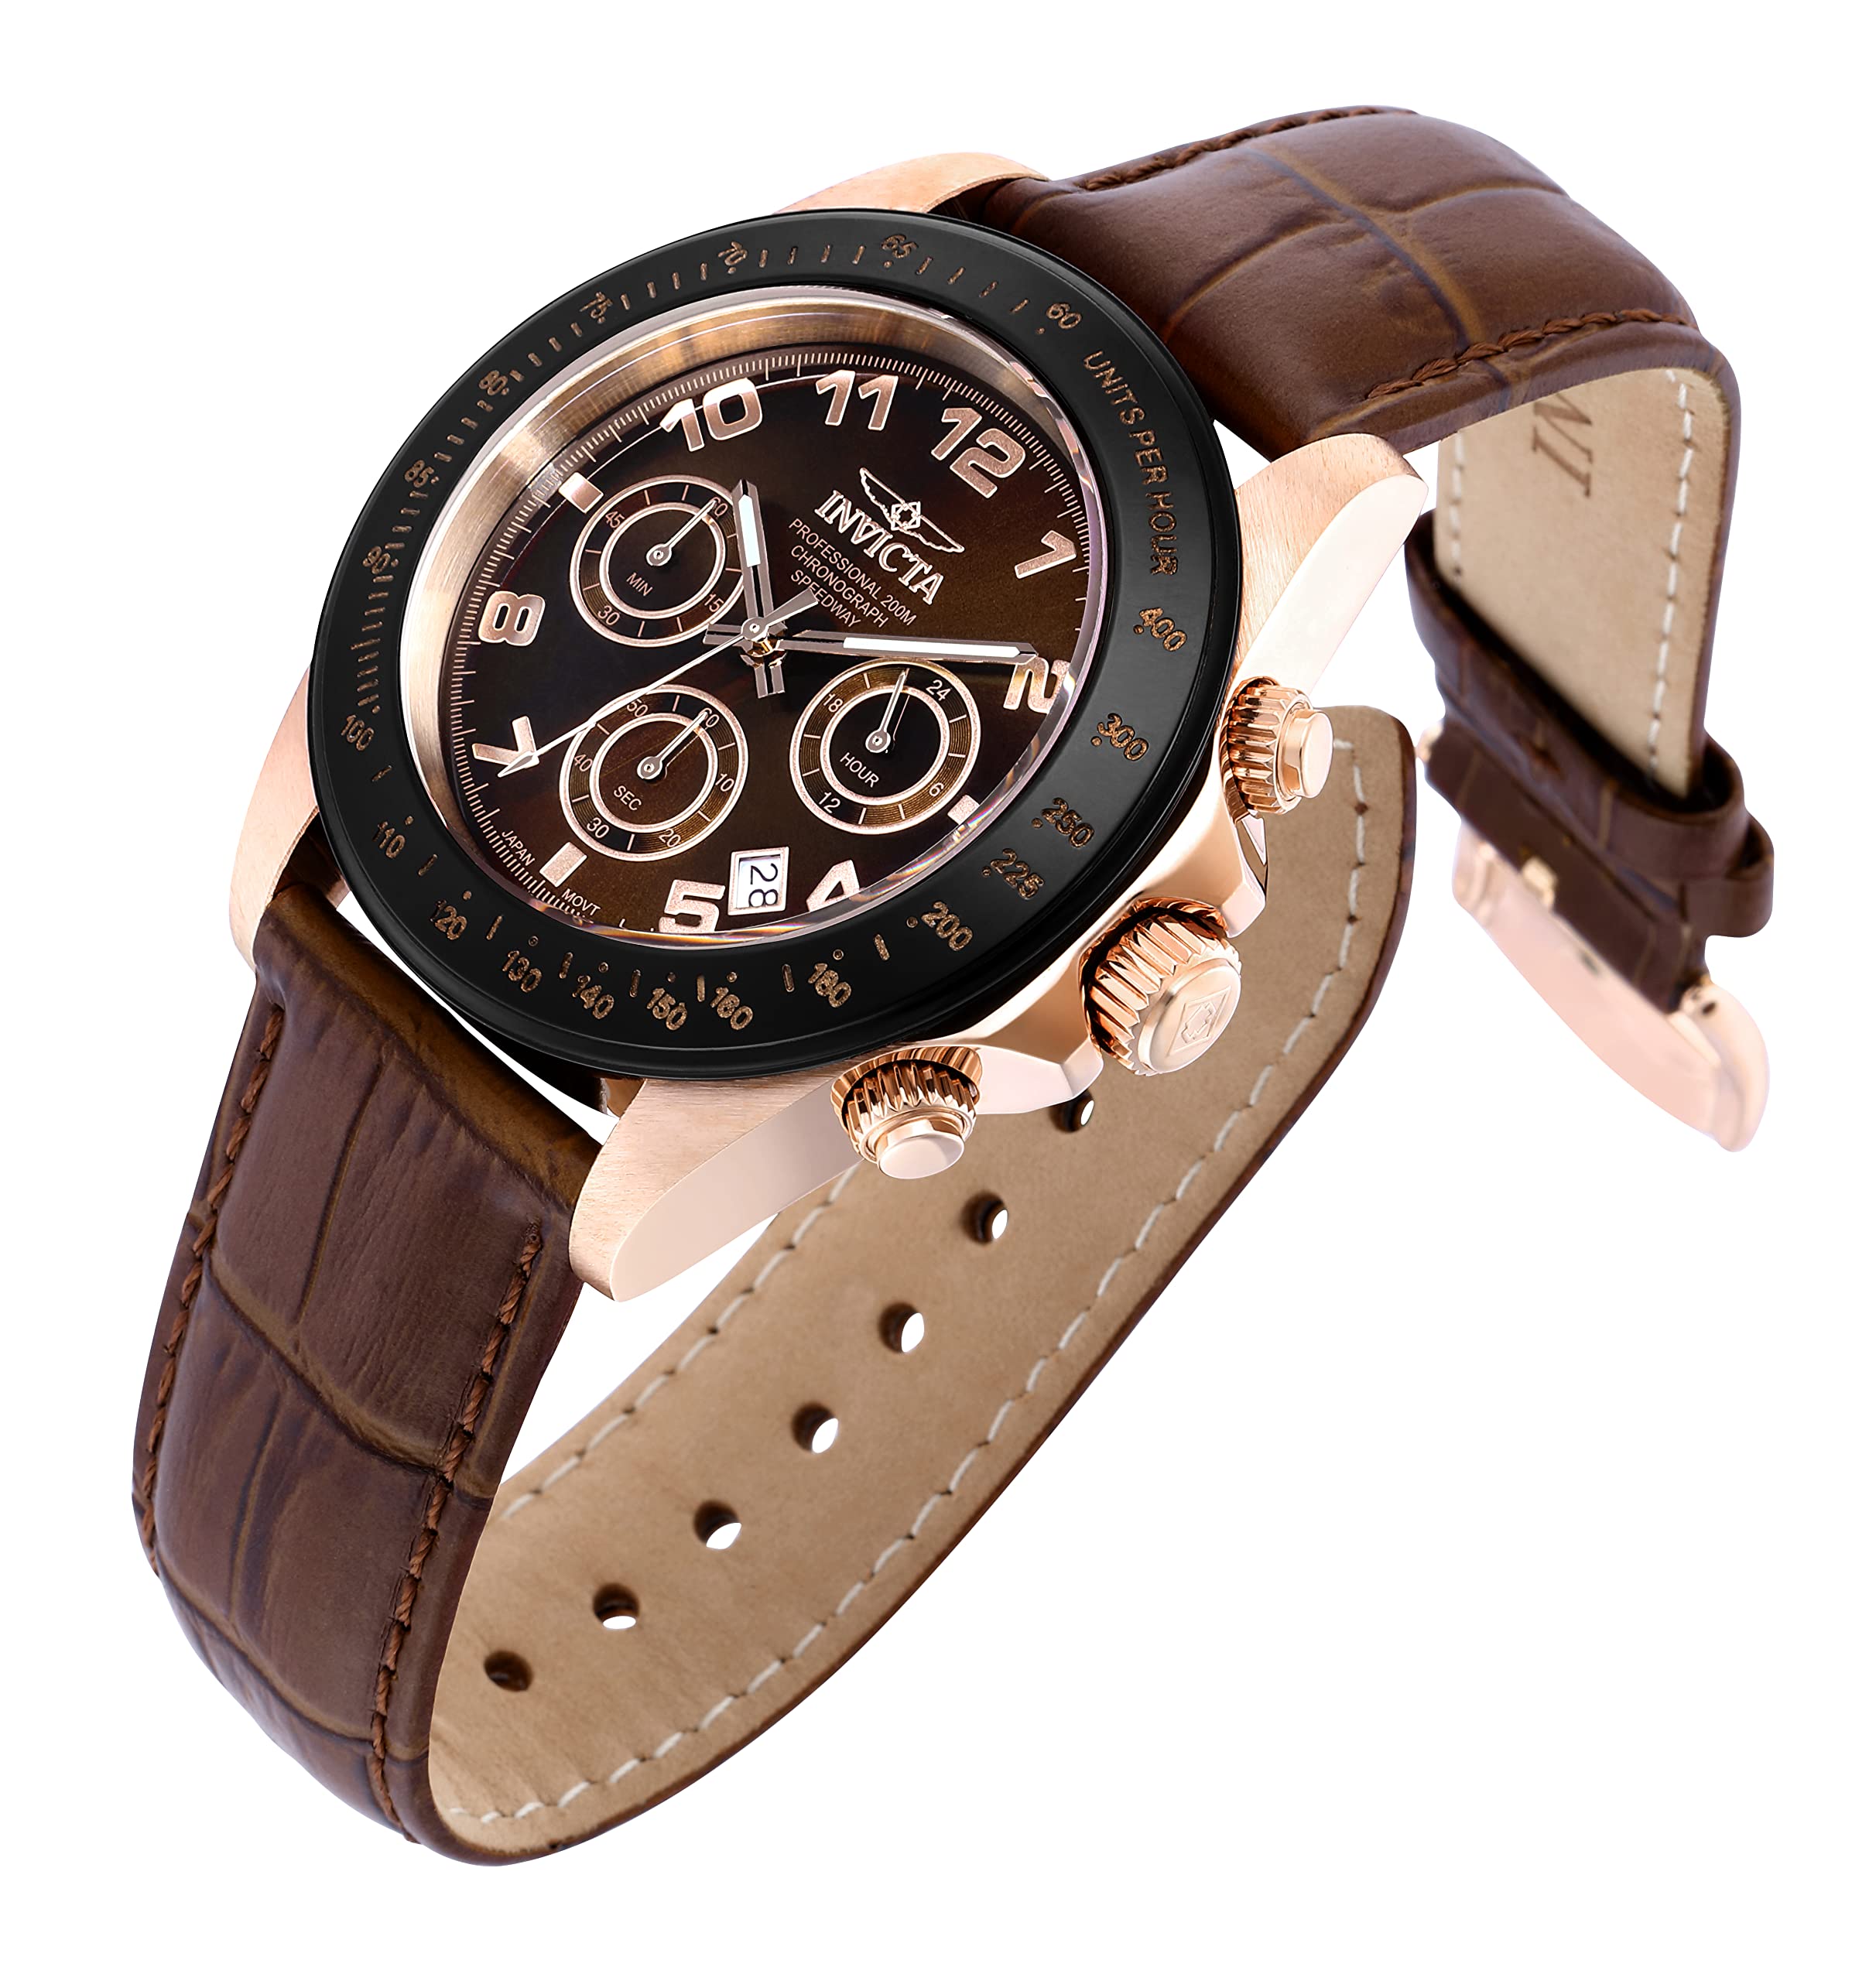 Invicta Men's 10712 Speedway Brown Dial Brown Leather Watch